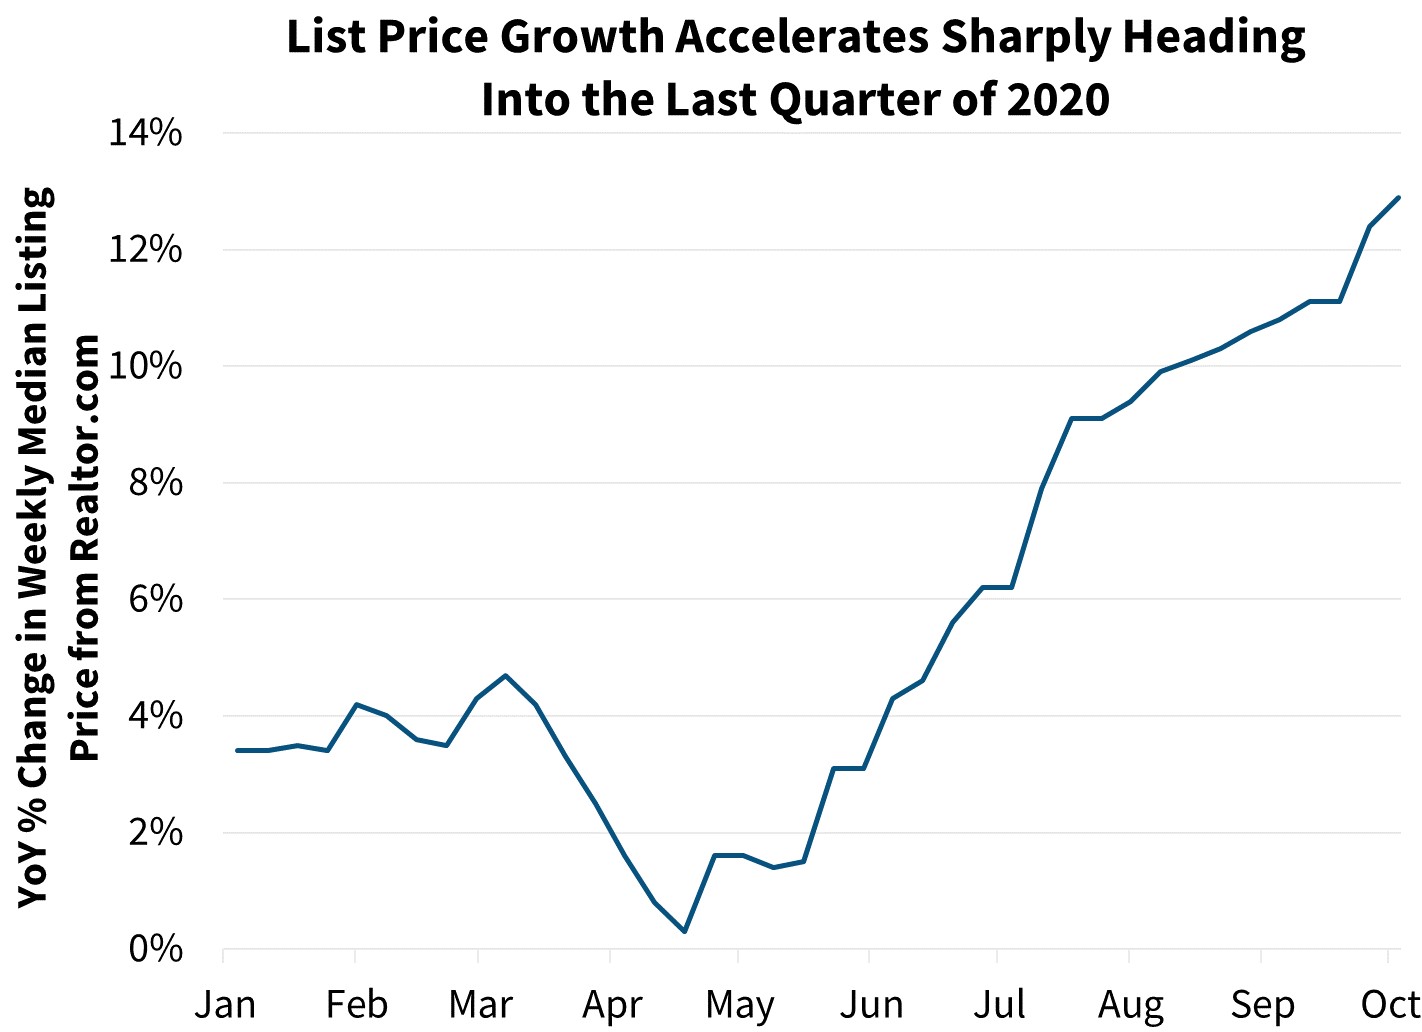  List Price Growth Accelerates Sharply Heading Into the Last Quarter of 2020
